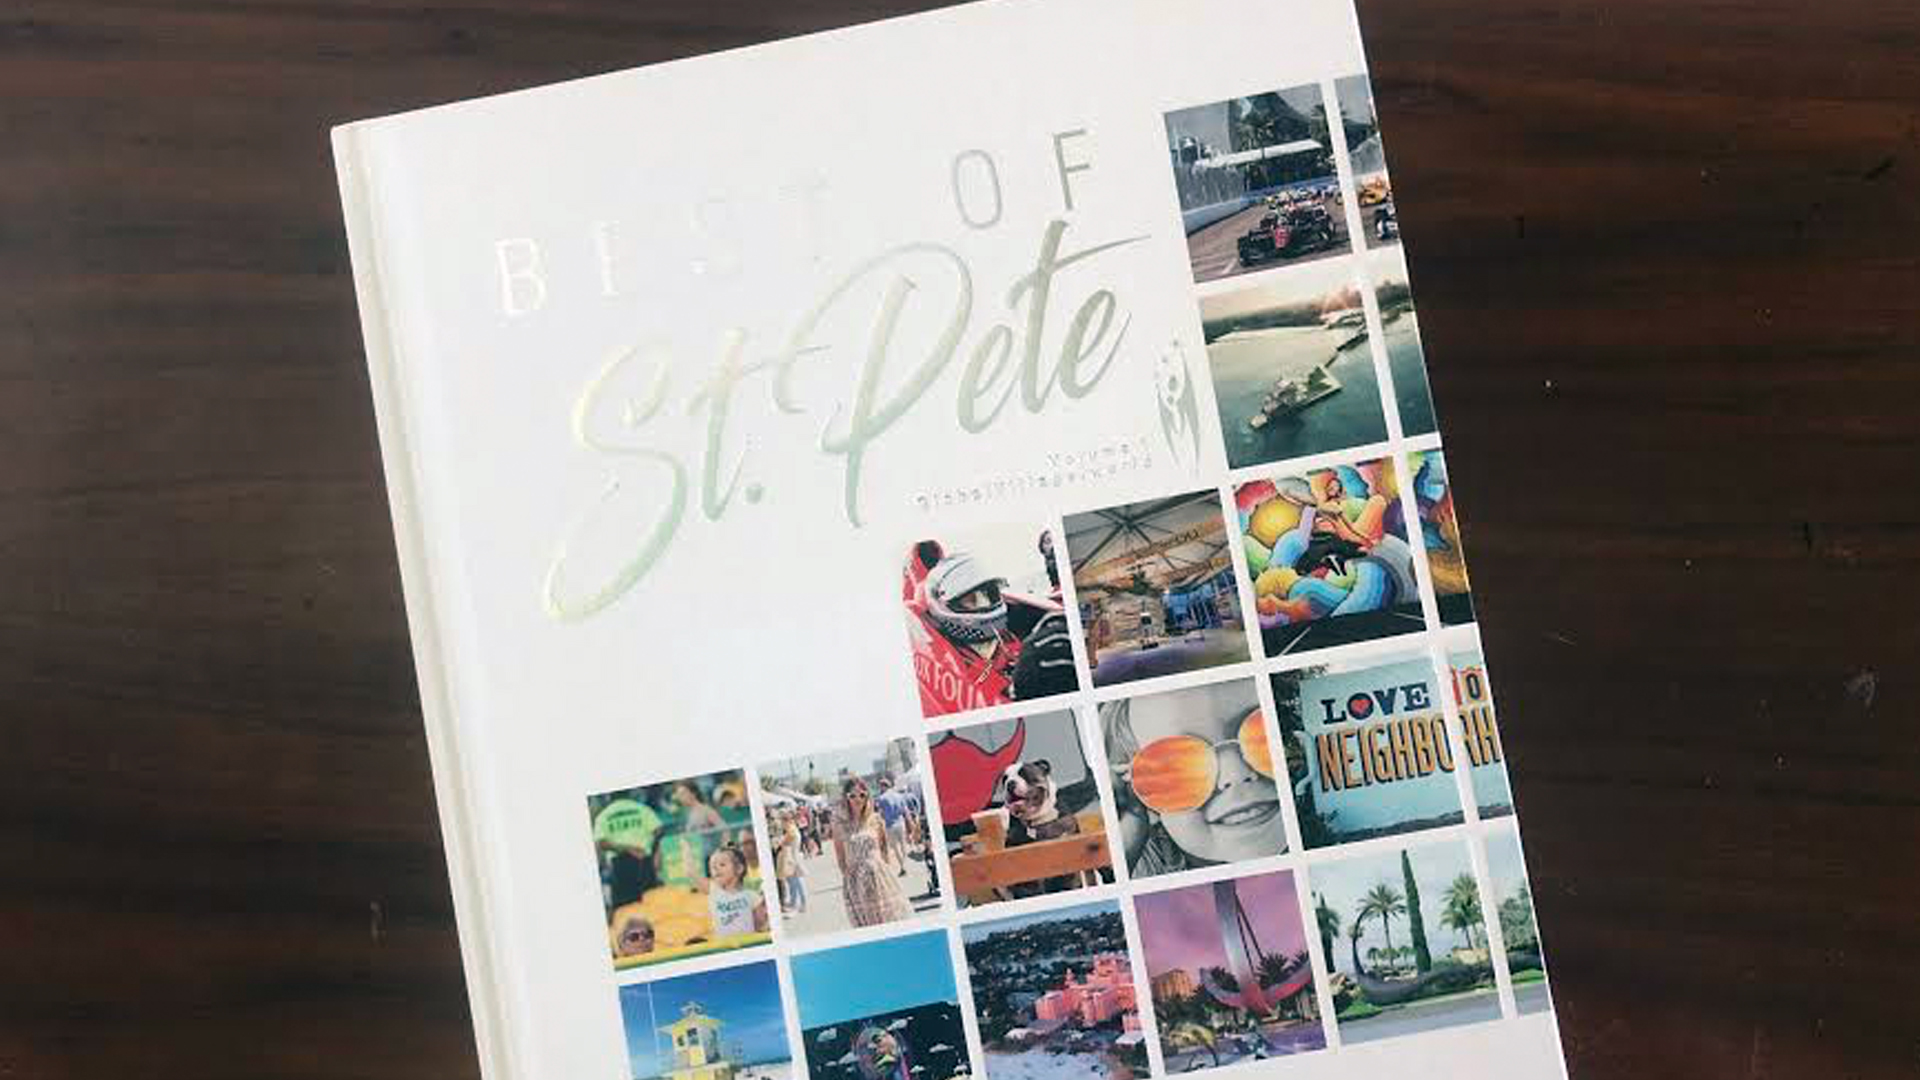 Image of Best of St. Pete book